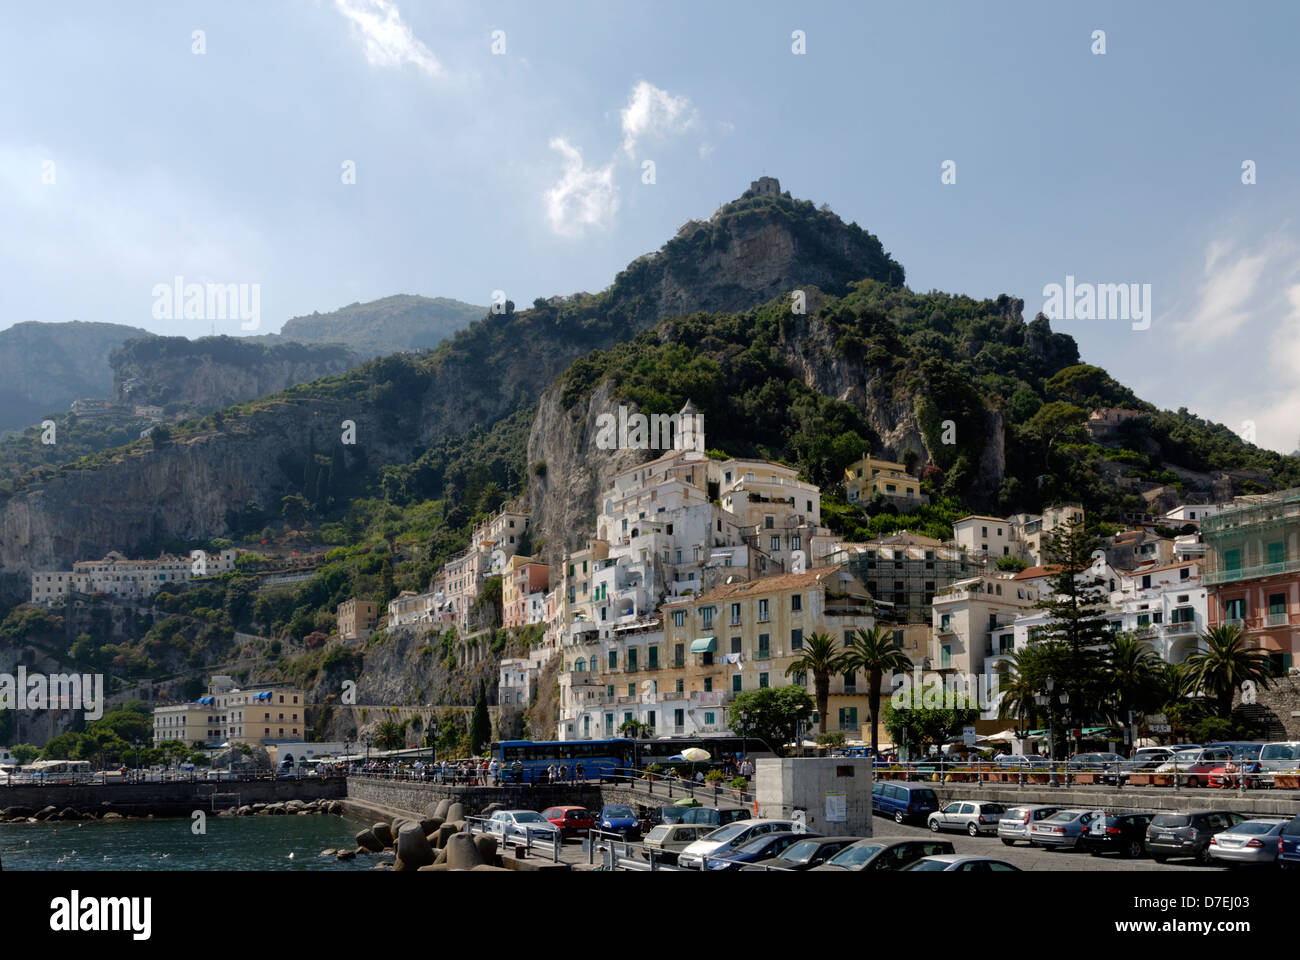 Amalfi. Italy. Partial view of Amalfi town which is theatrically set in a narrow gorge rising from the Mediterranean Sea. Amalfi Stock Photo